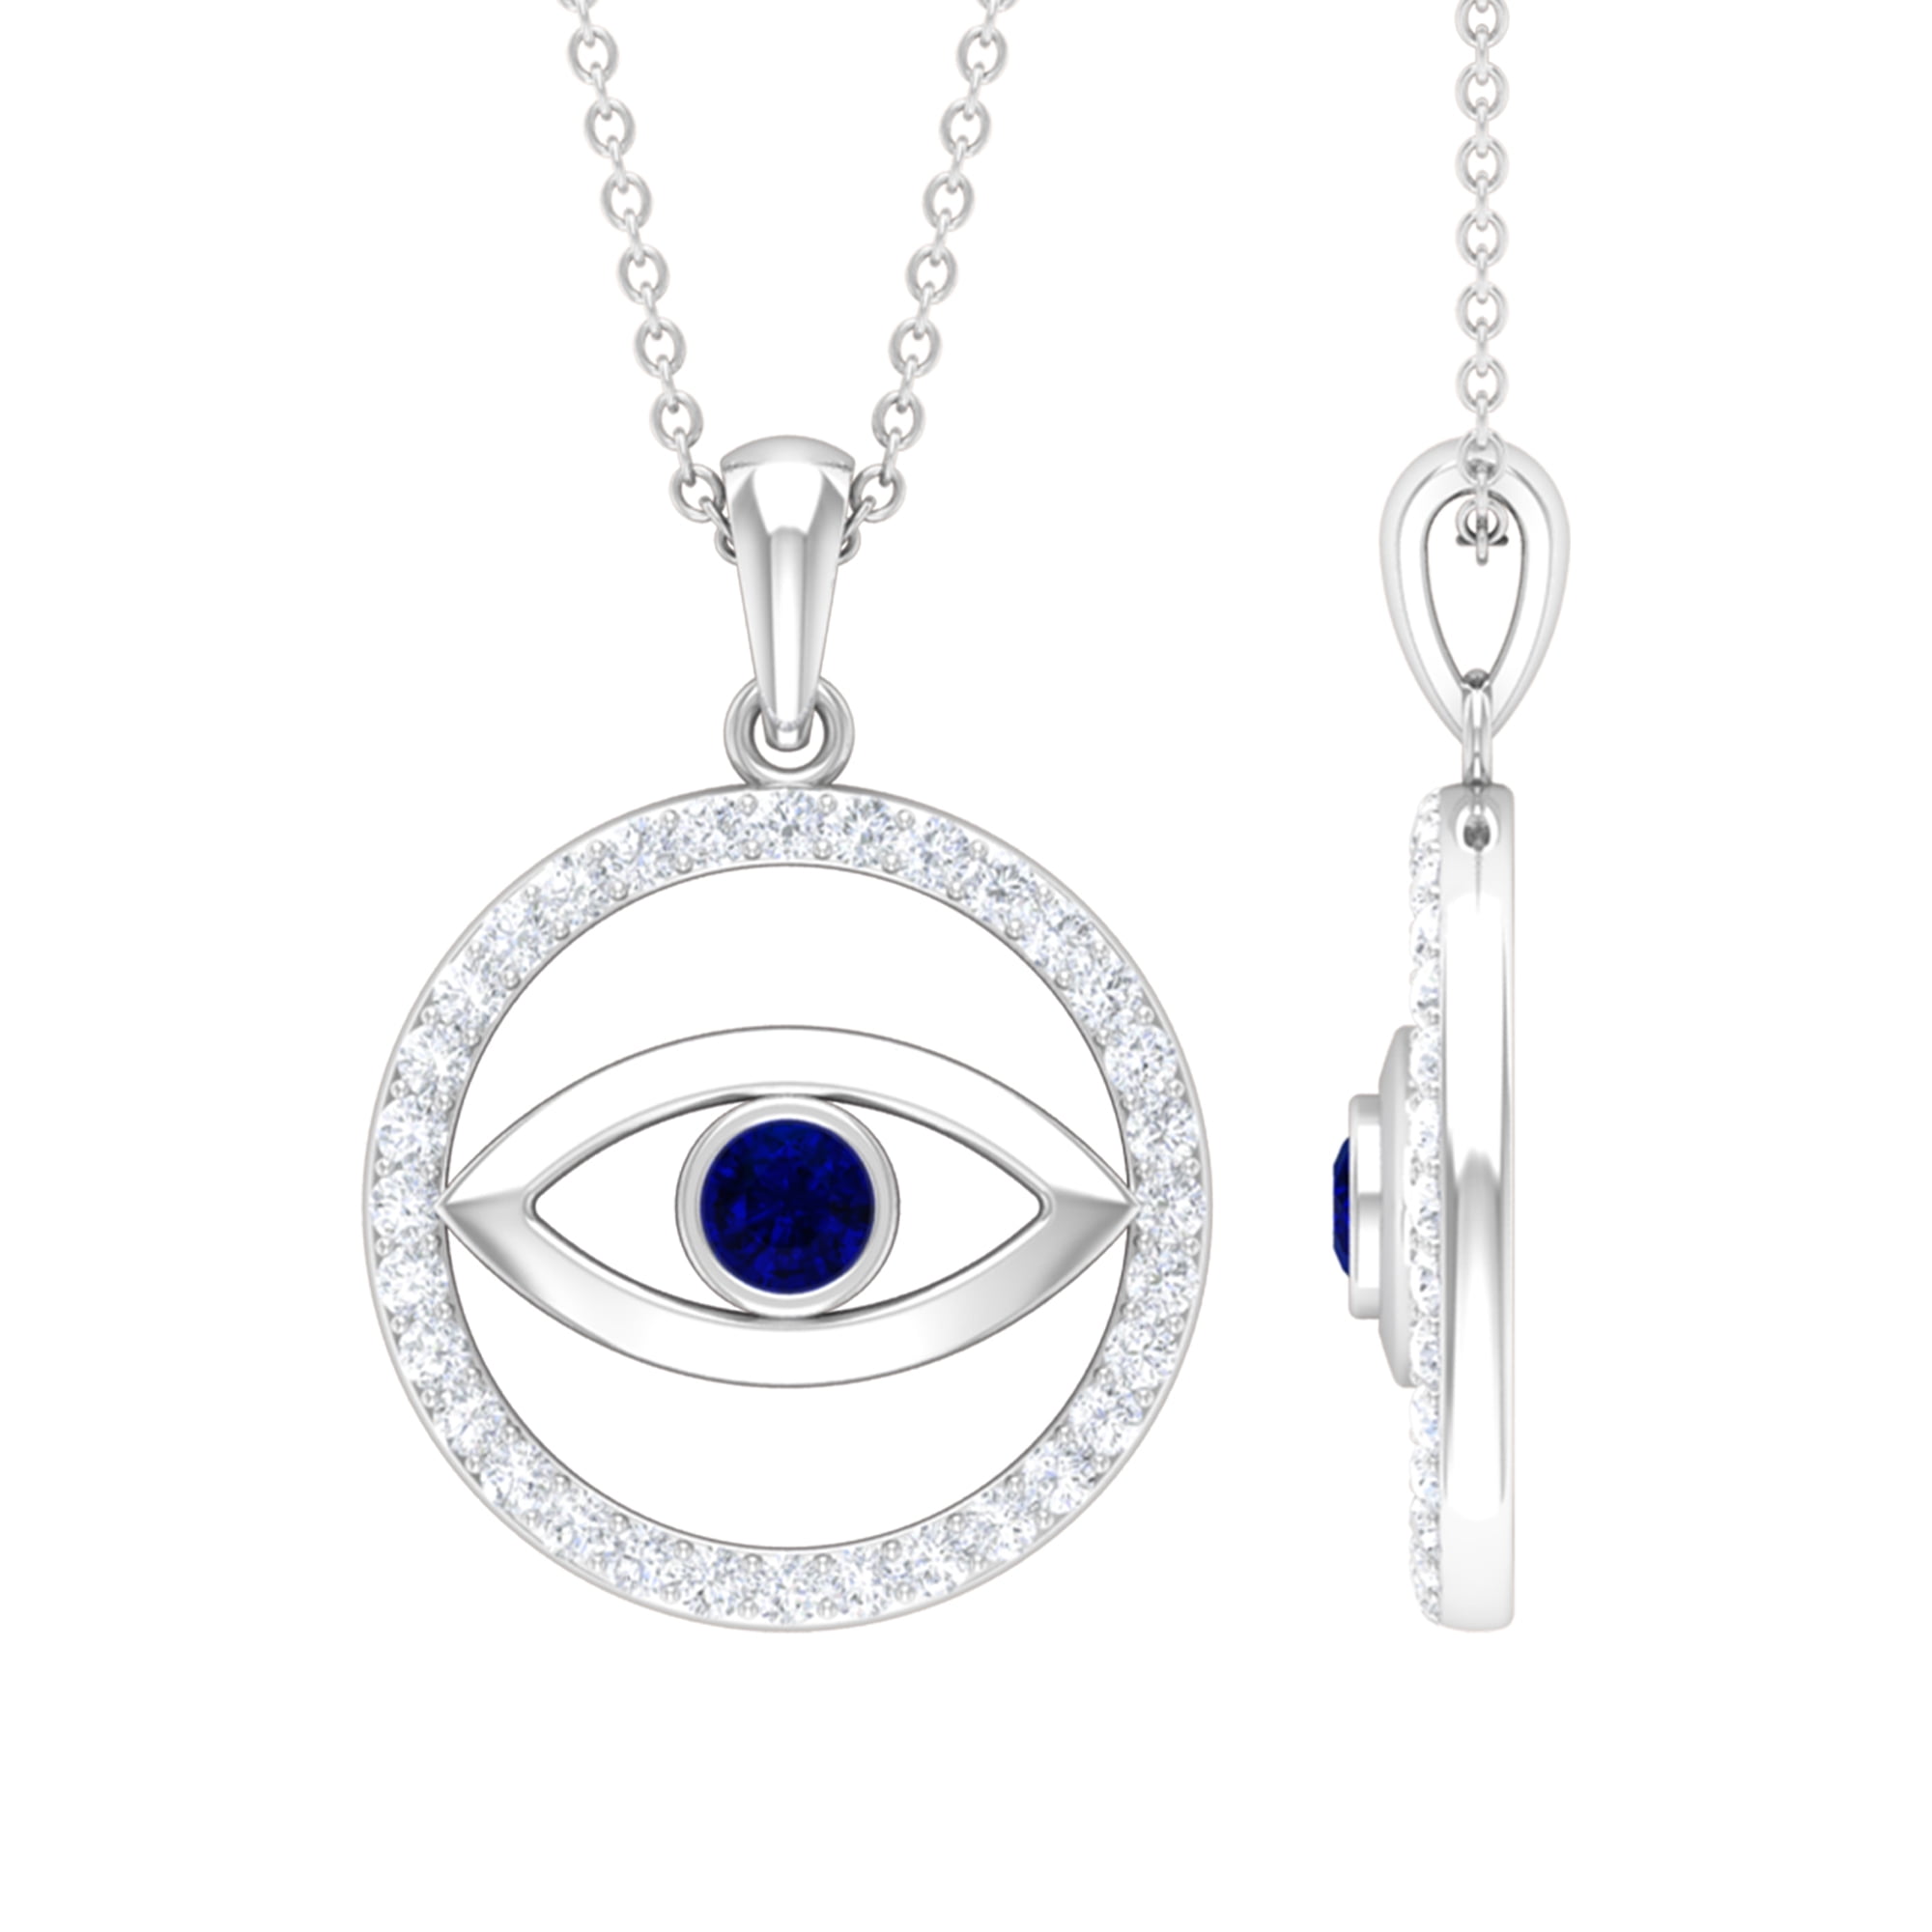 Buy without chain for women silver Pendant evil eye blue stone by  CEYLONMINE Online - Get 86% Off